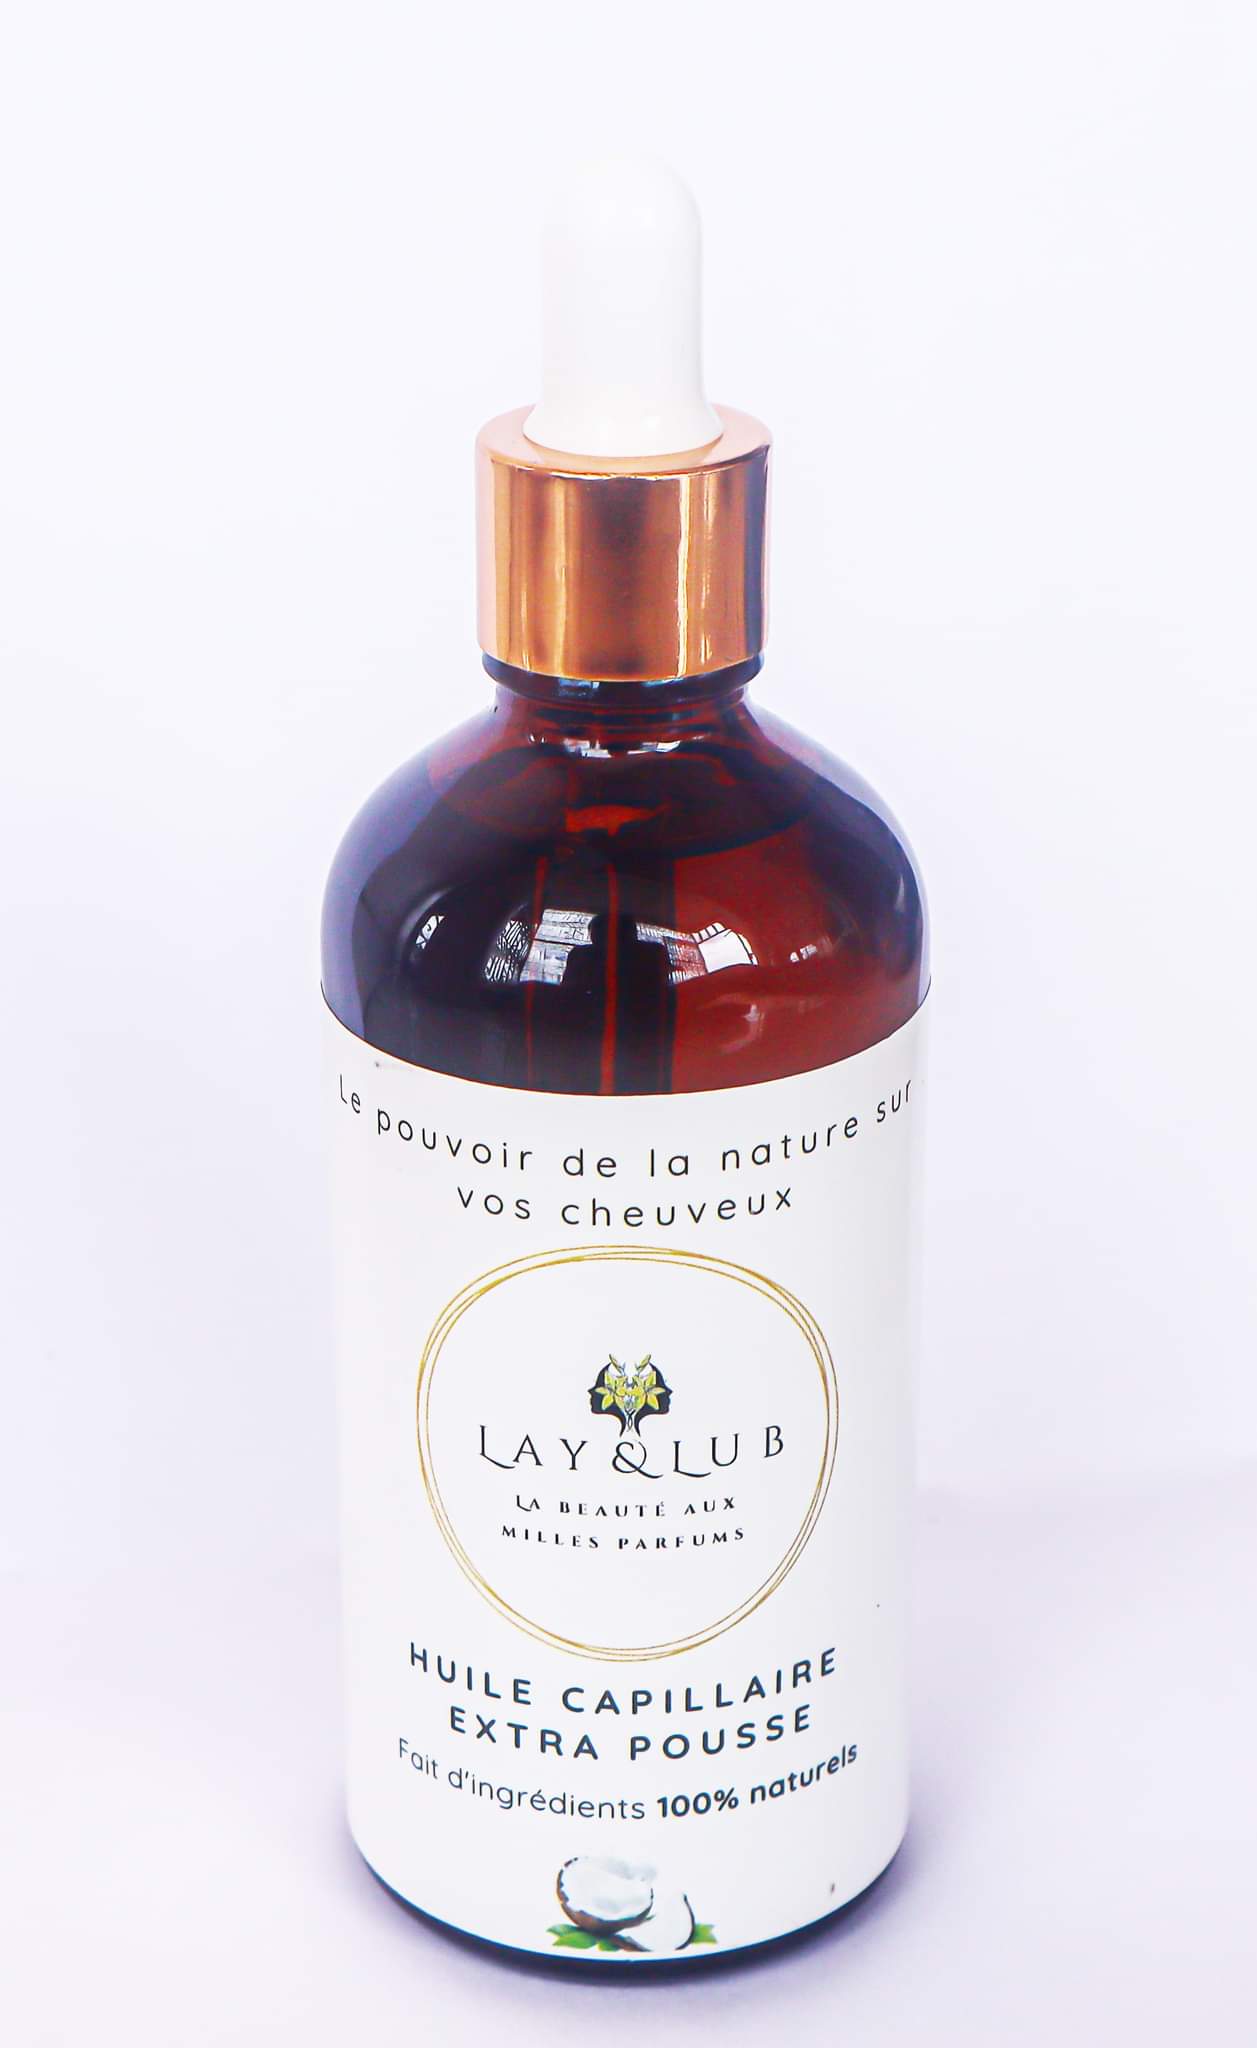 Huile capillaire by Lay & Lub